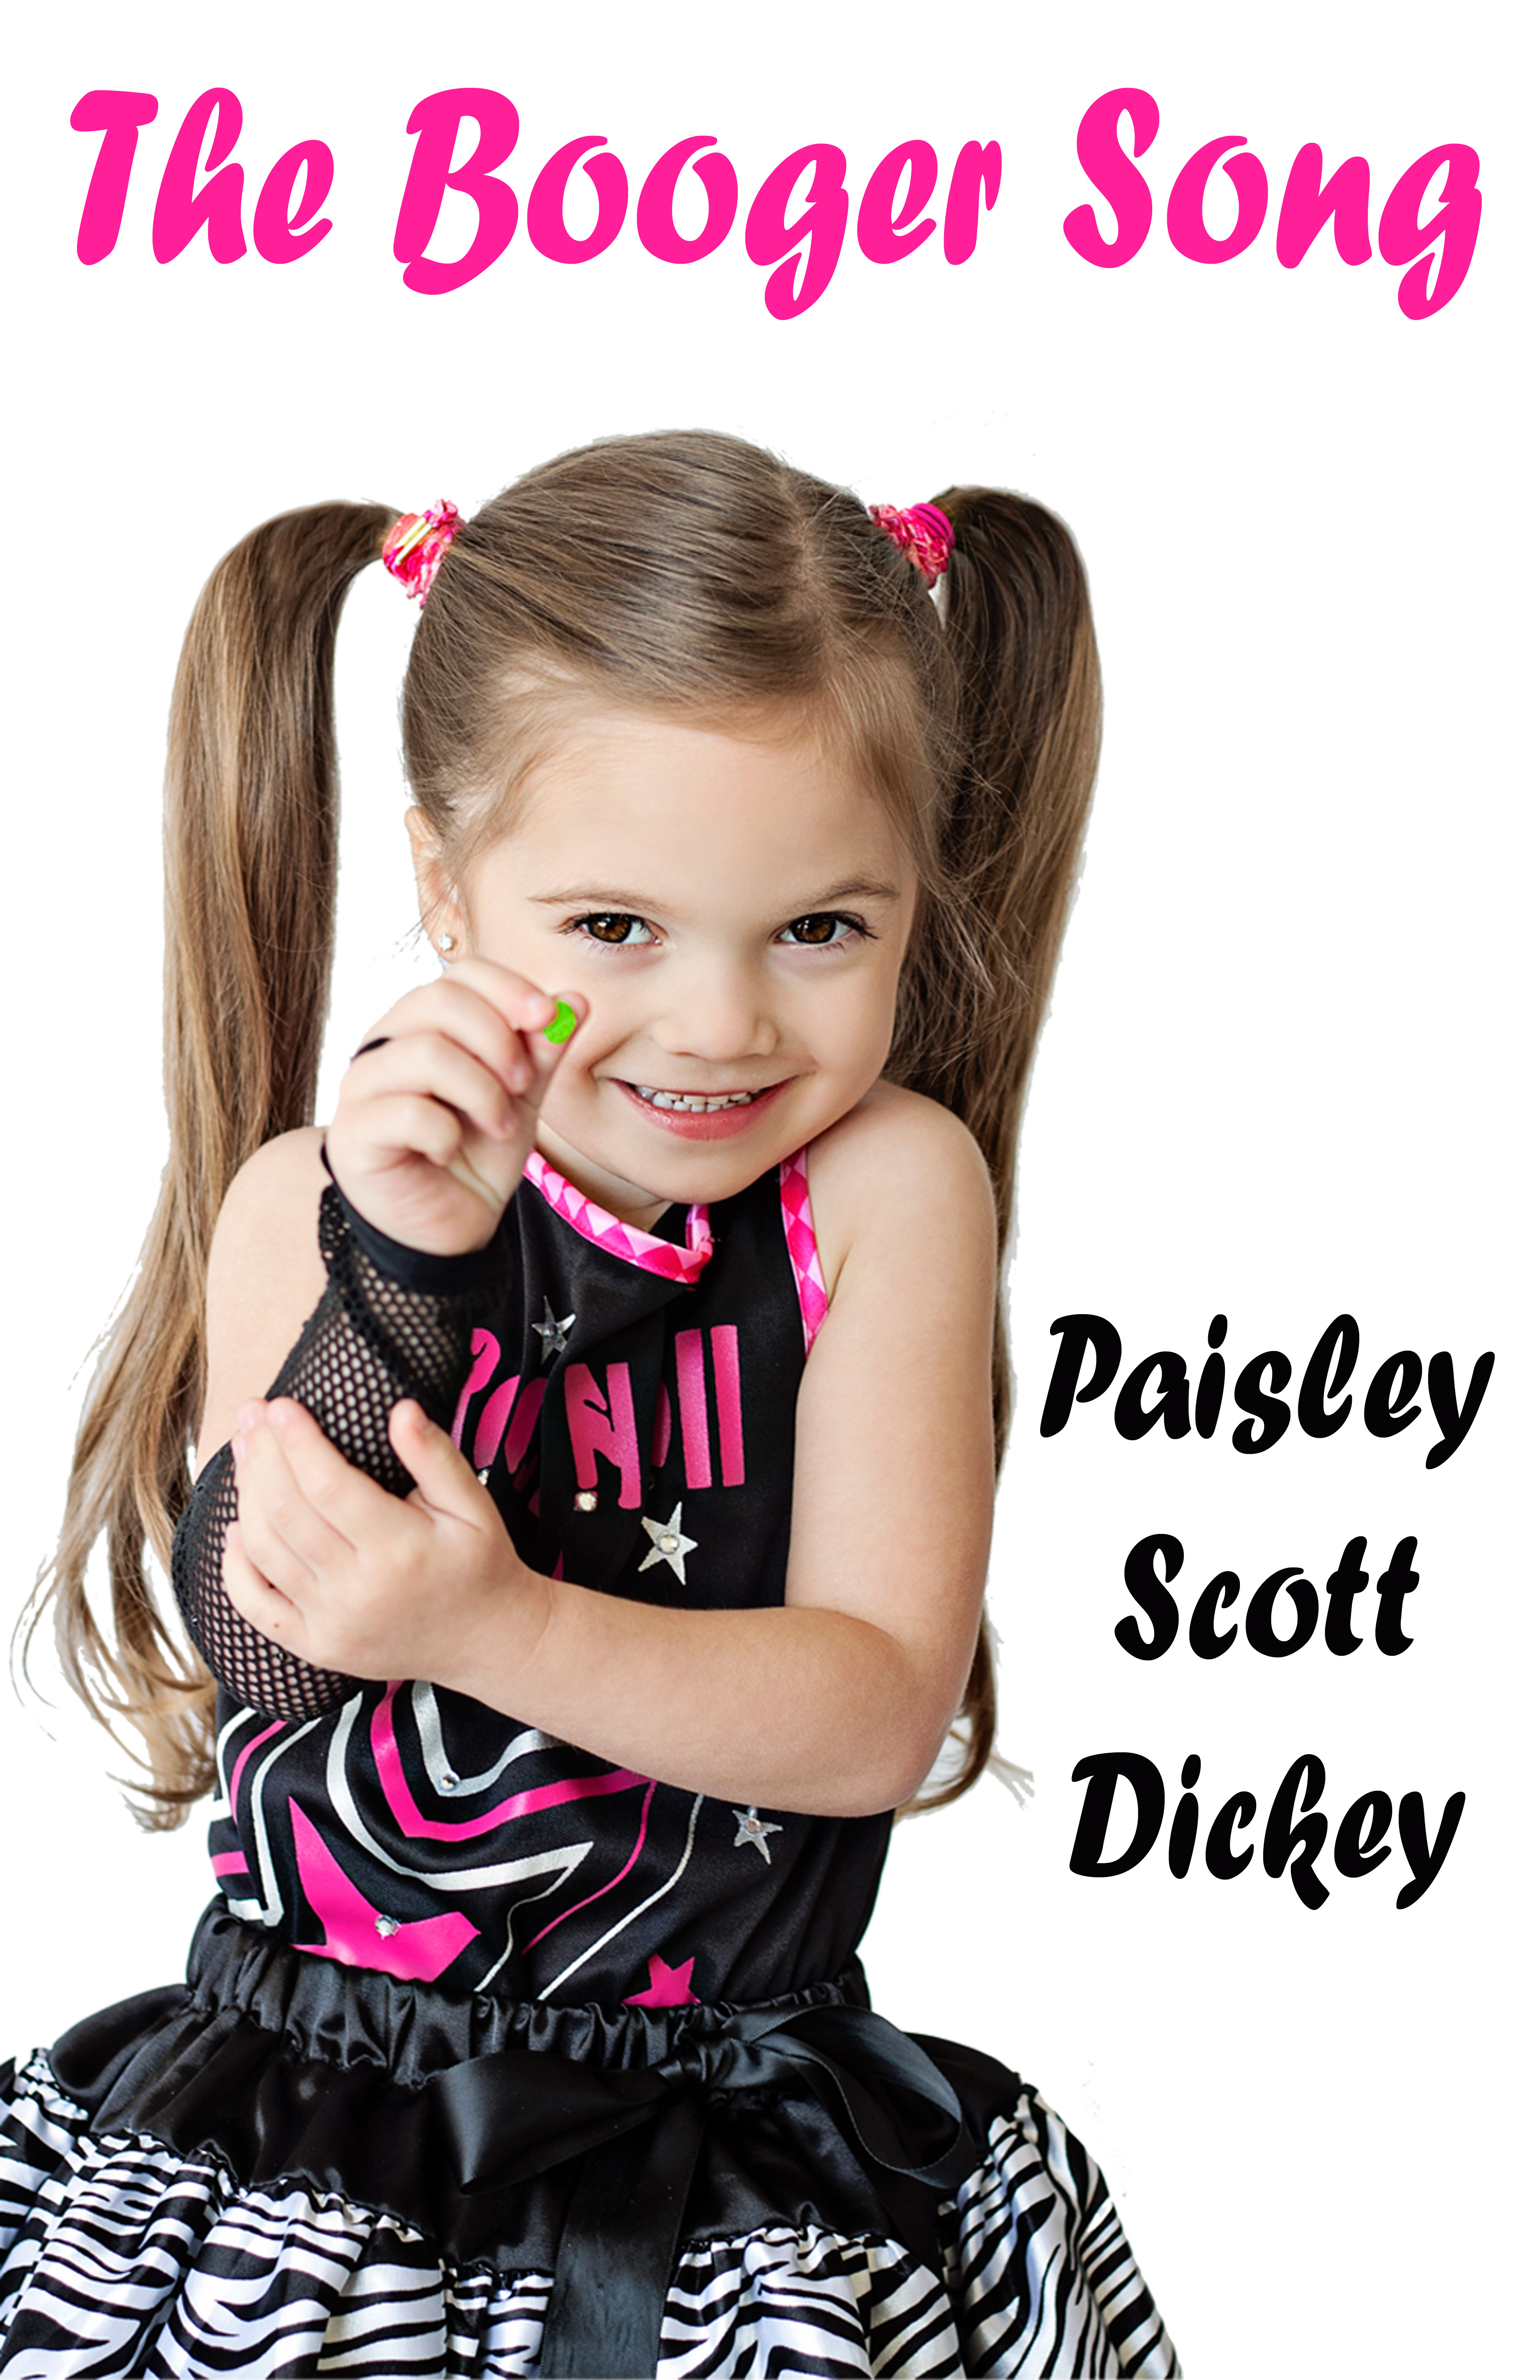 Album cover for Paisley's itunes song 